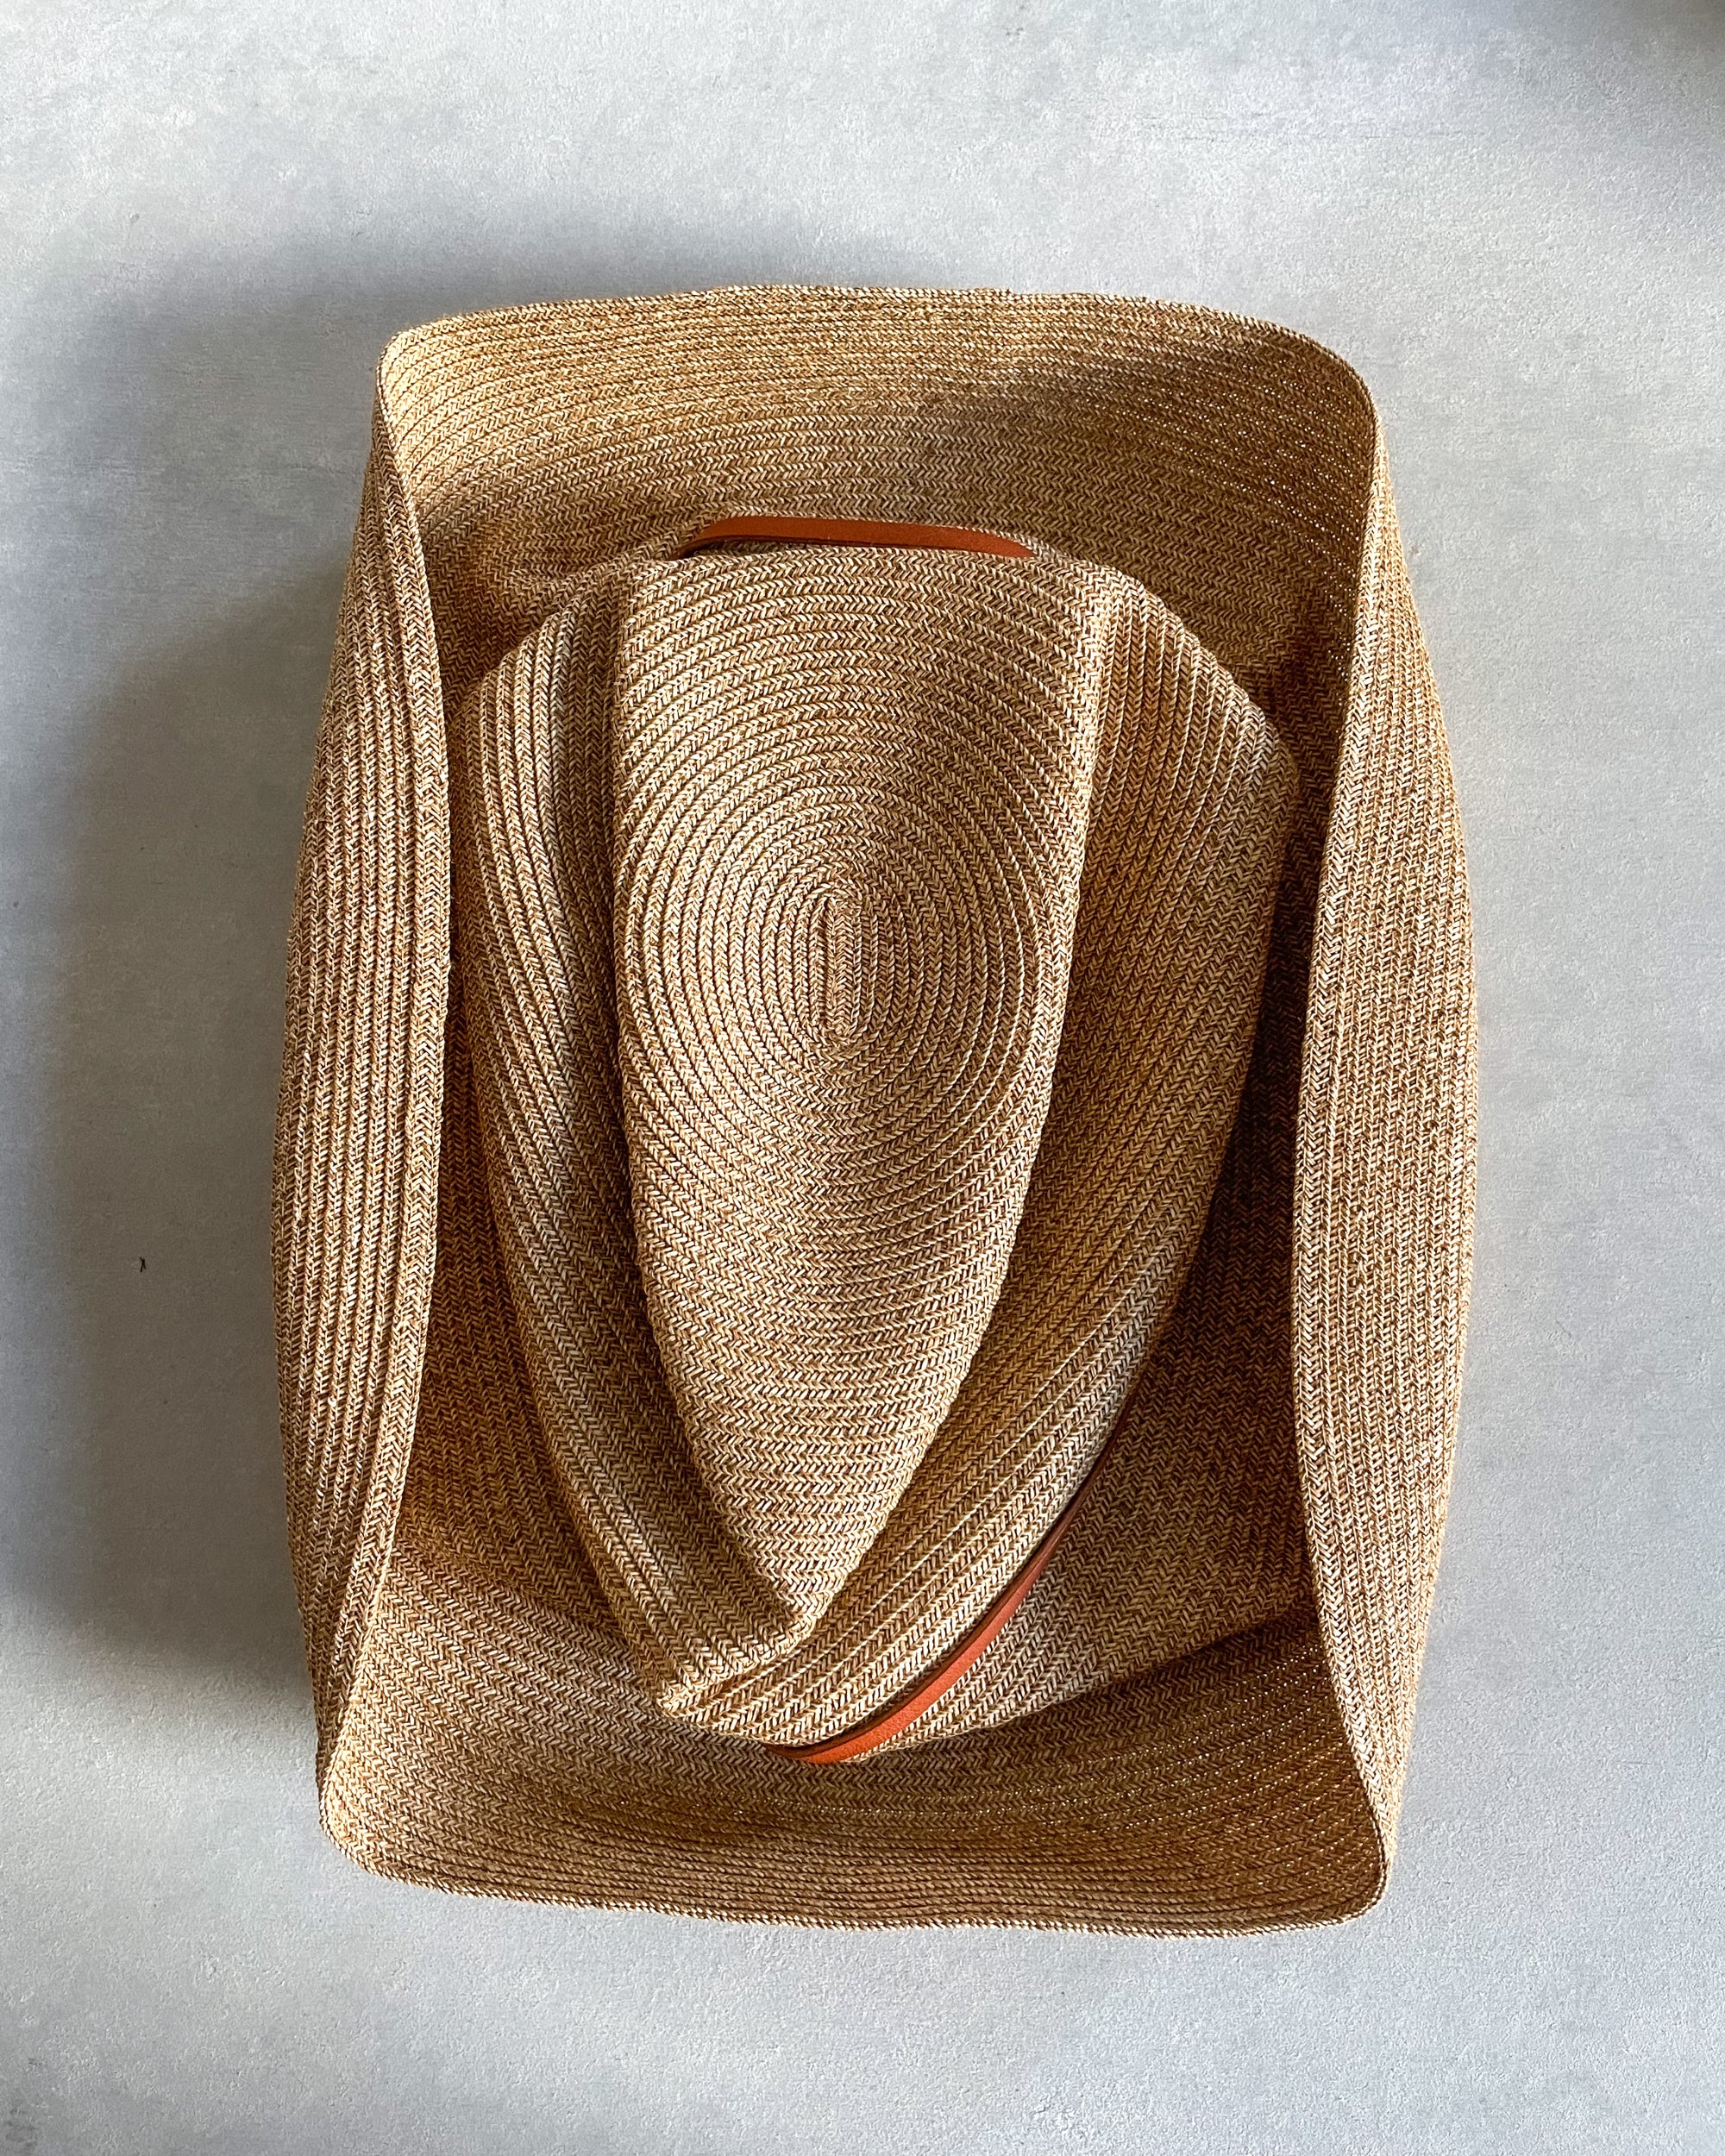 mature ha : boxed hat with leather trim